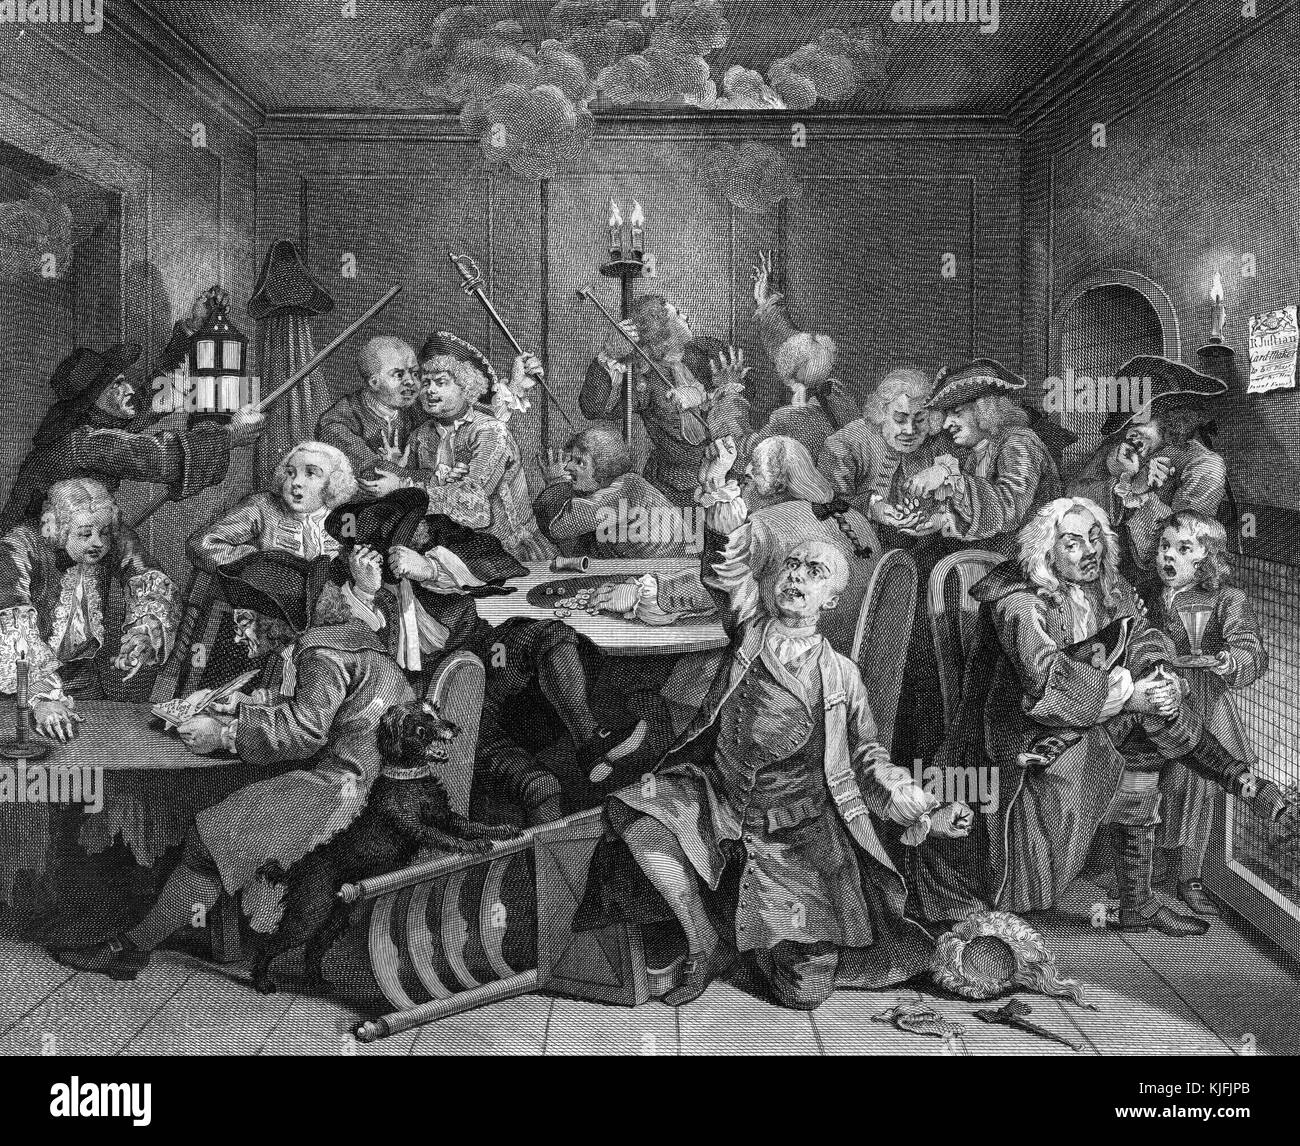 Etching and engraving on paper, titled 'A Rake's Progress, Plate 6, Tom Rakewell's gambling, second inevitable loss of fortune', depicting a group of people in a room, sitting at tables gambling, some gesturing at smoke coming from the ceiling, by William Hogarth, 1735. From the New York Public Library. Stock Photo